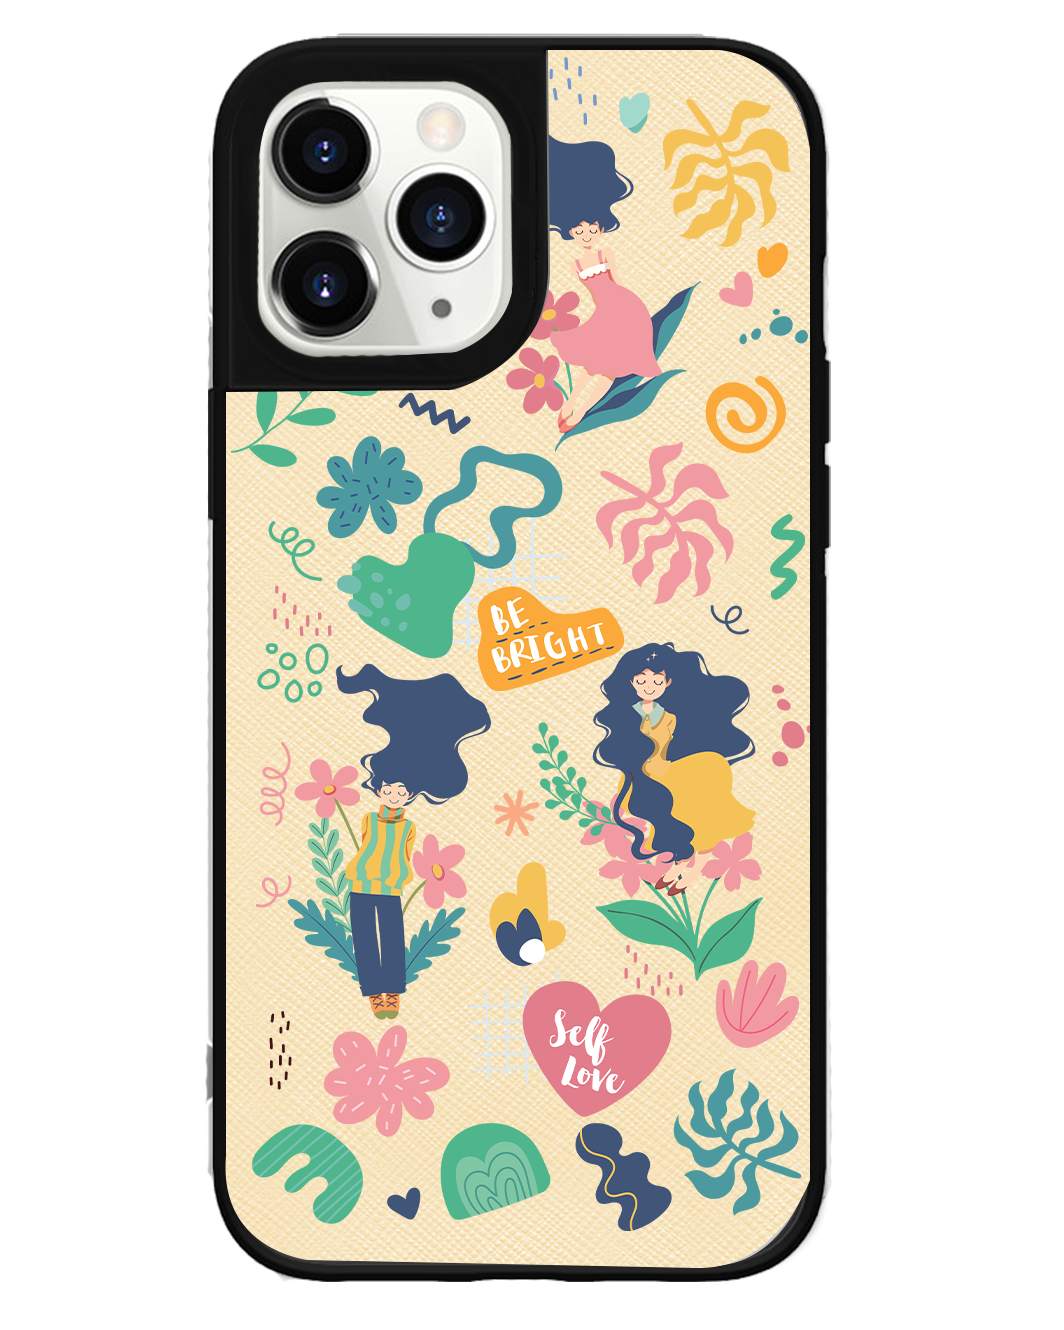 iPhone Leather Grip Case - Self Love Sticker Pack 2.0